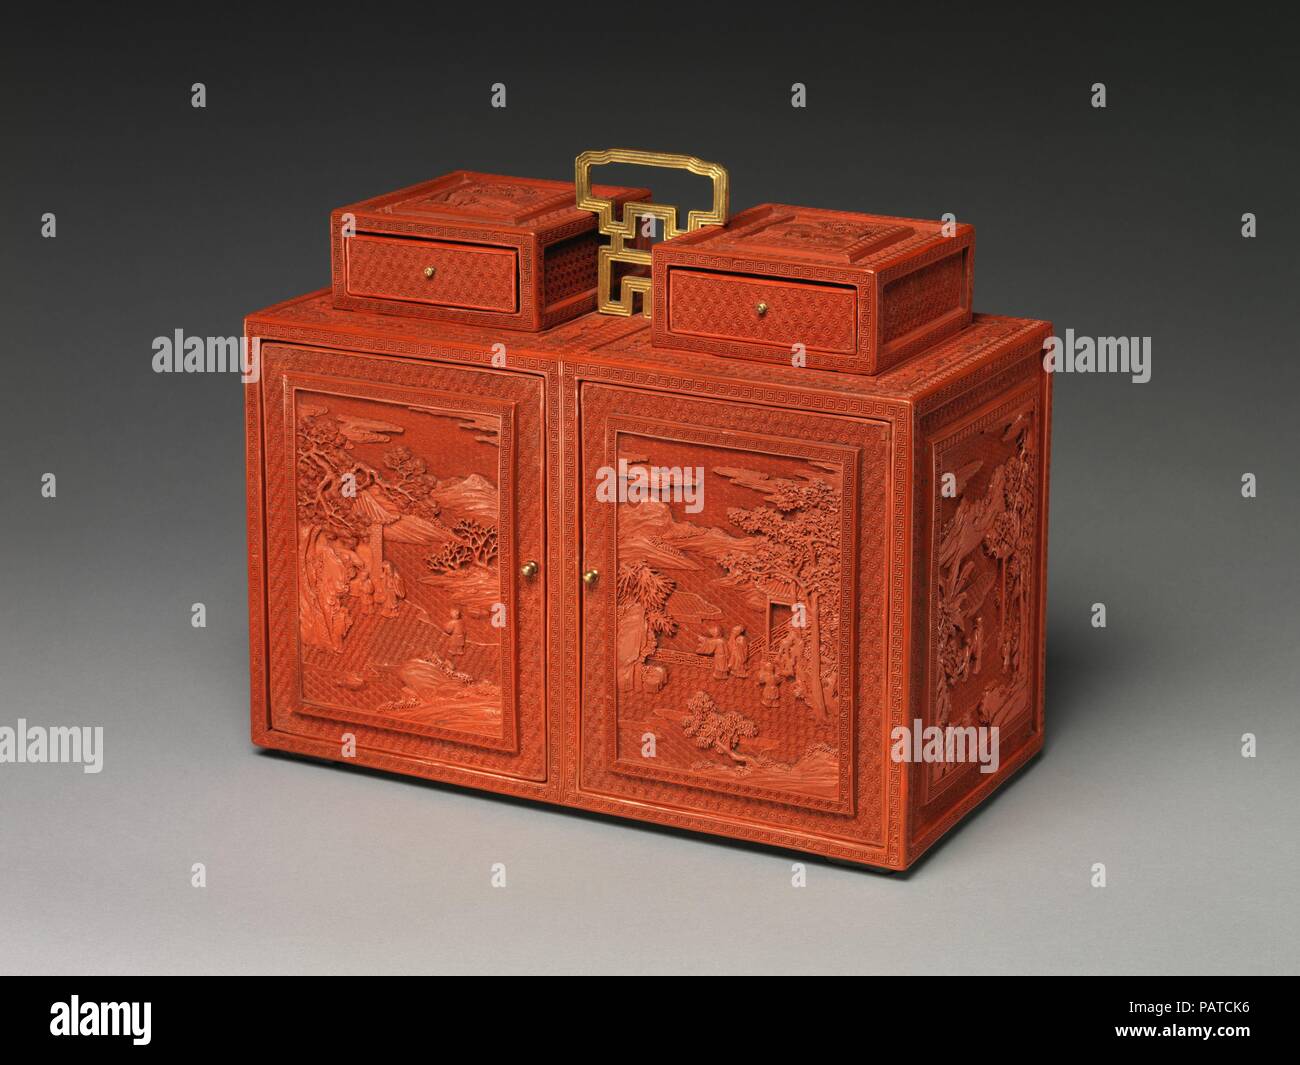 Cabinet with Figures in a Landscape. Culture: China. Dimensions: H. 13 in. (33 cm); W. 7 7/8 in. (20 cm); L. 35.9 in. (35.9 cm). Date: 18th century.  This two-door cabinet looks as if it is two separate boxes held together by the gilt-bronze handles at the top, but it is actually a single piece. The six side panels are decorated with figures along a riverbank or on a garden terrace by the water, with receding hills in the far distance. The tops of the two drawers are adorned with deer in a landscape. The sharp, precise carving of the red lacquer is characteristic of works produced in Qianlong  Stock Photo